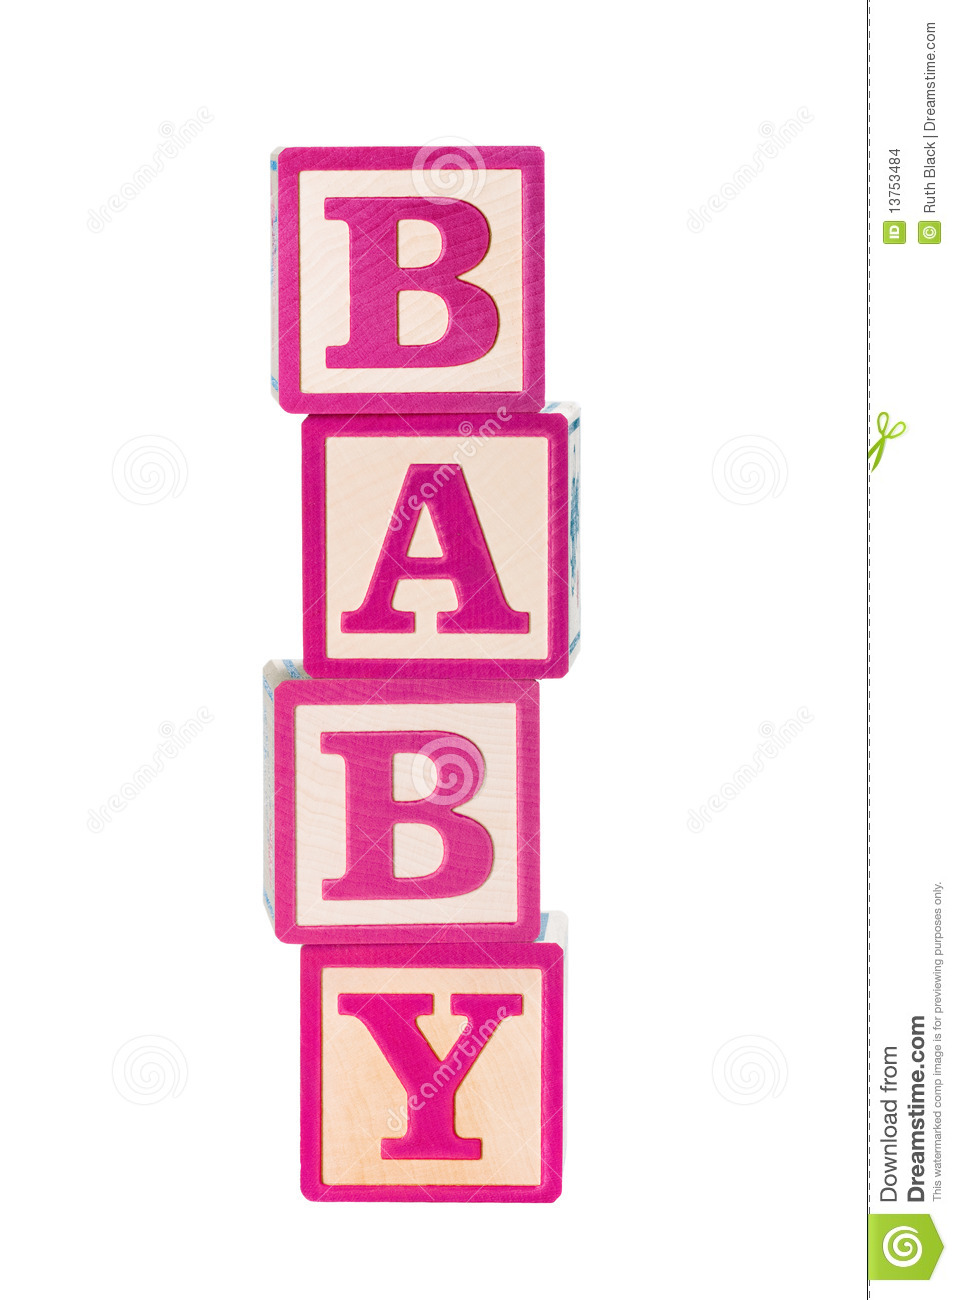 Baby Building Blocks Stock Images   Image  13753484